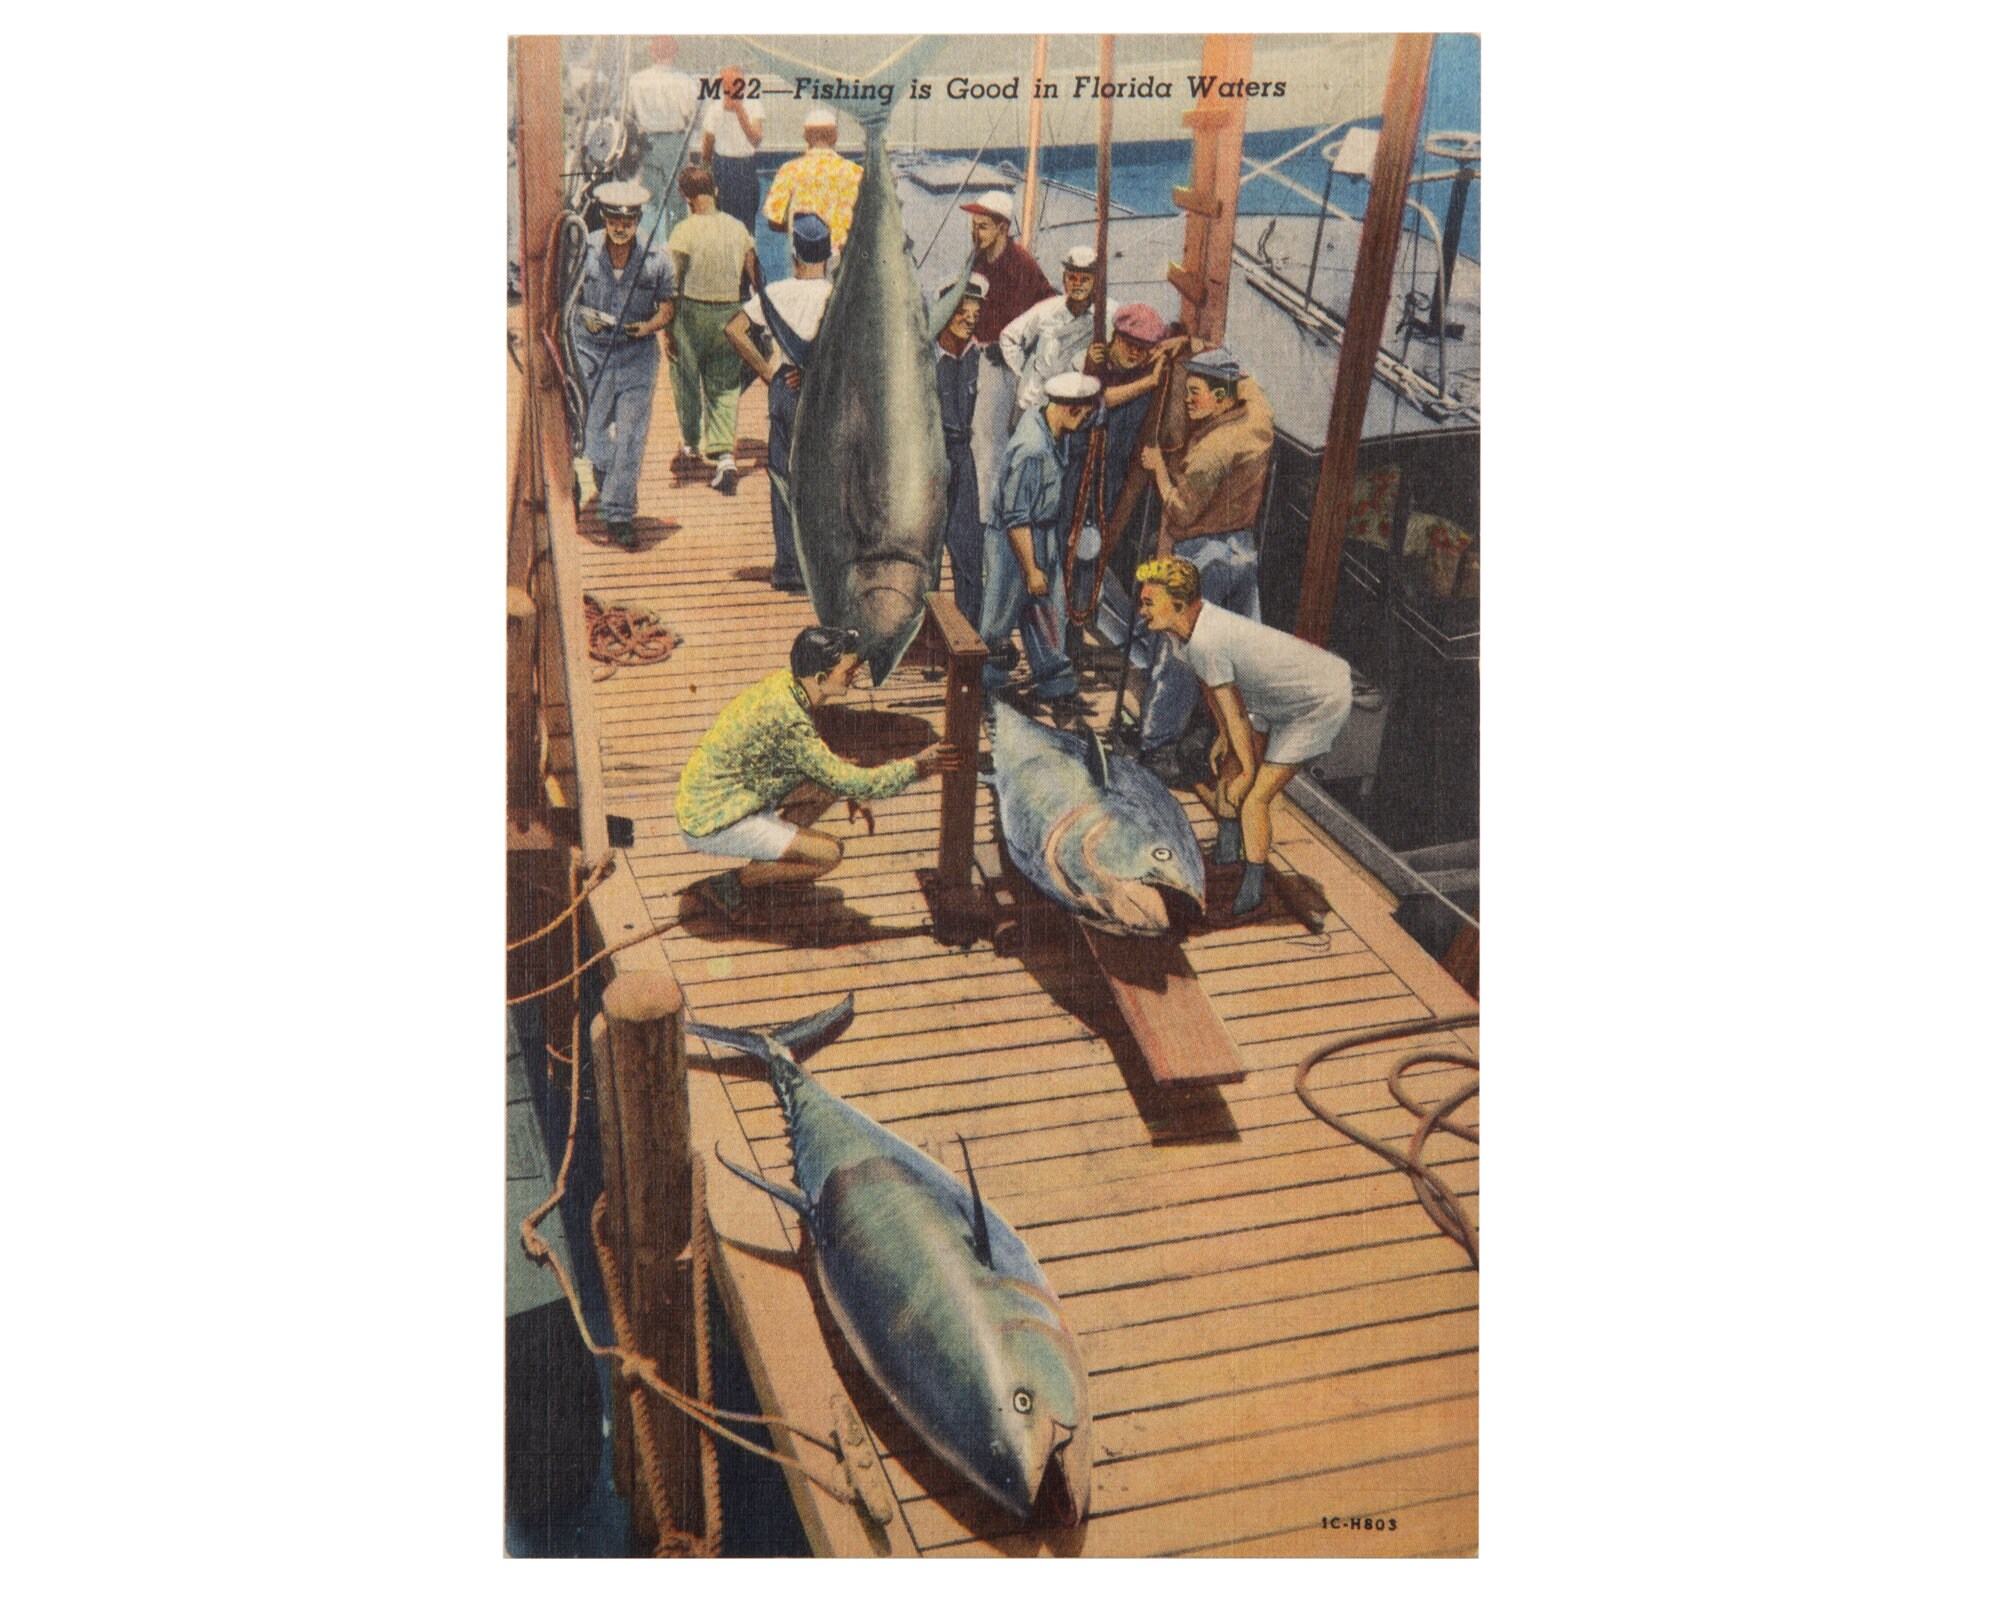 Snook Wall Art Print Birthday Fishing Gifts for a Saltwater